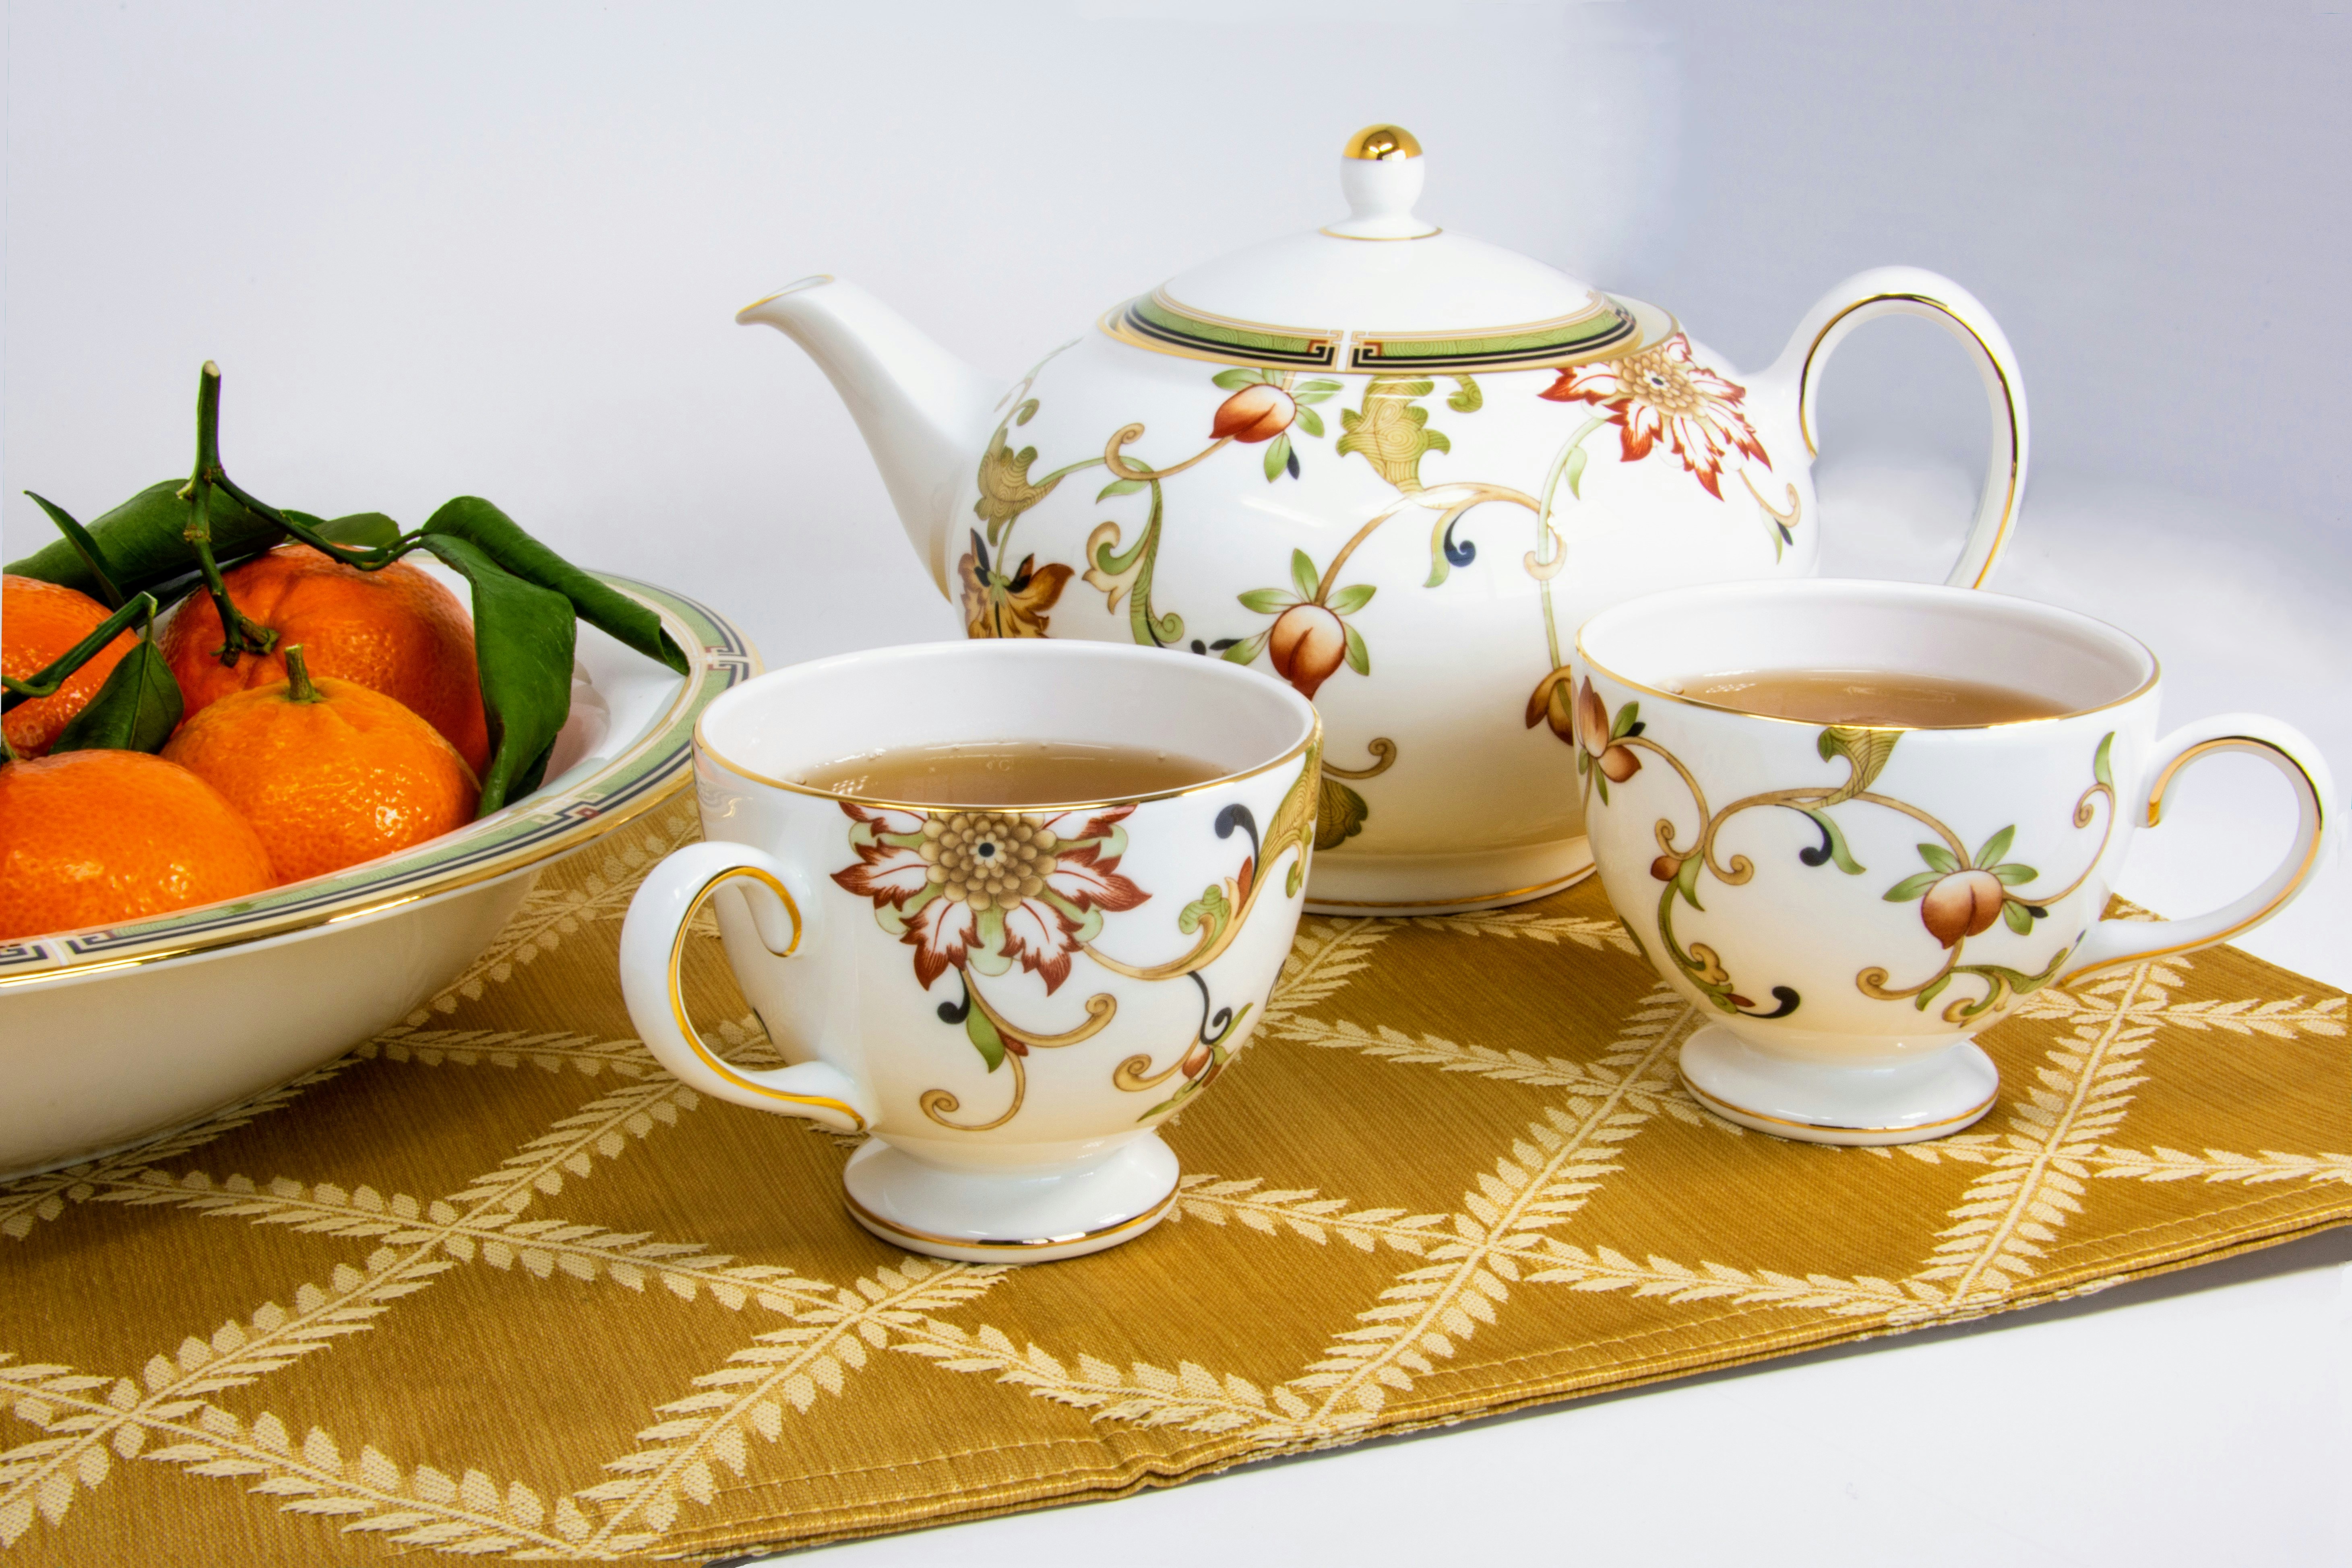 Tea for Two with fine china and healthy mandarins for a snack.